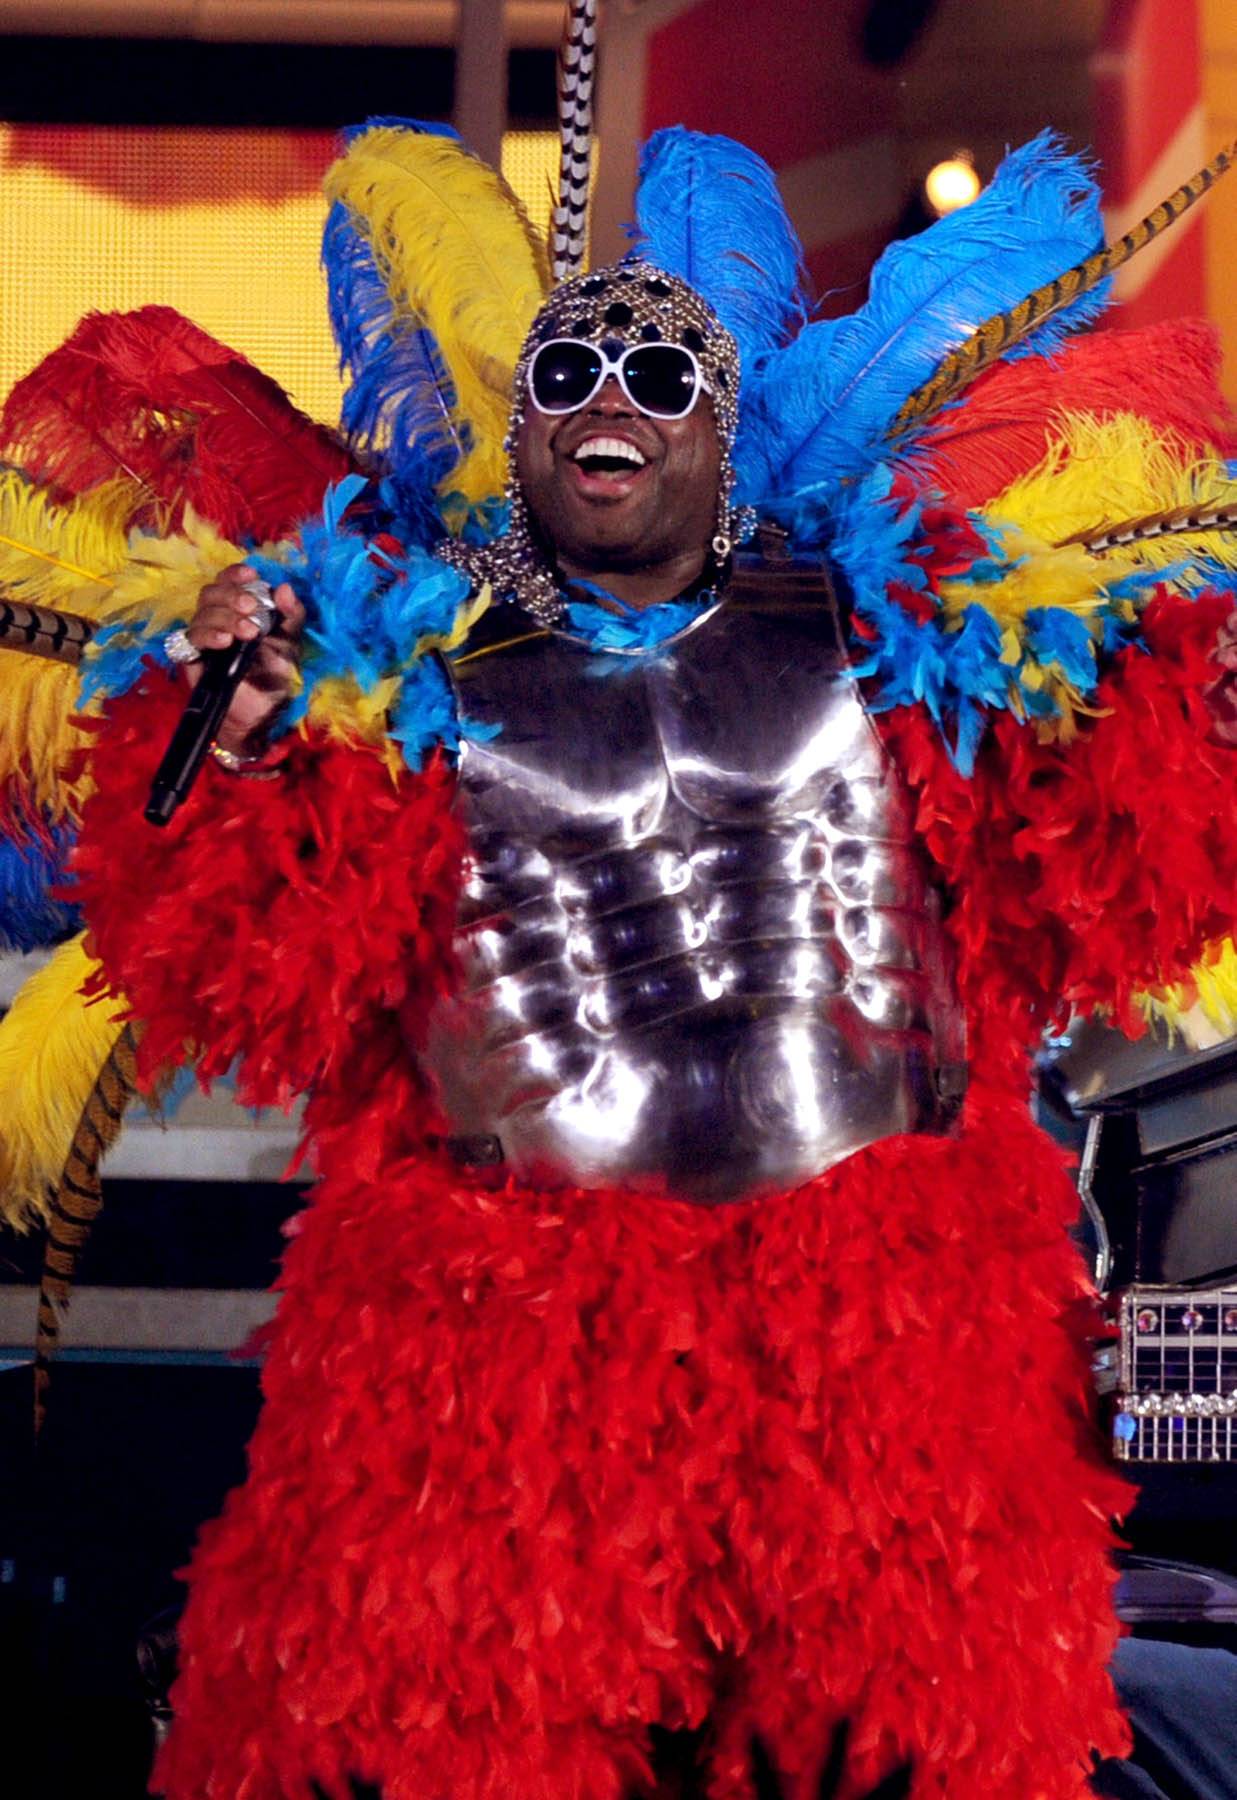 Cee Lo - Never afraid to shine, Cee Lo Green loves a little pageantry. Check this feather and steel number worn during a performance at the 53rd Annual GRAMMY Awards, when he sang with Jim Henson's muppets.&nbsp;   (Photo: Kevin Winter/Getty Images)